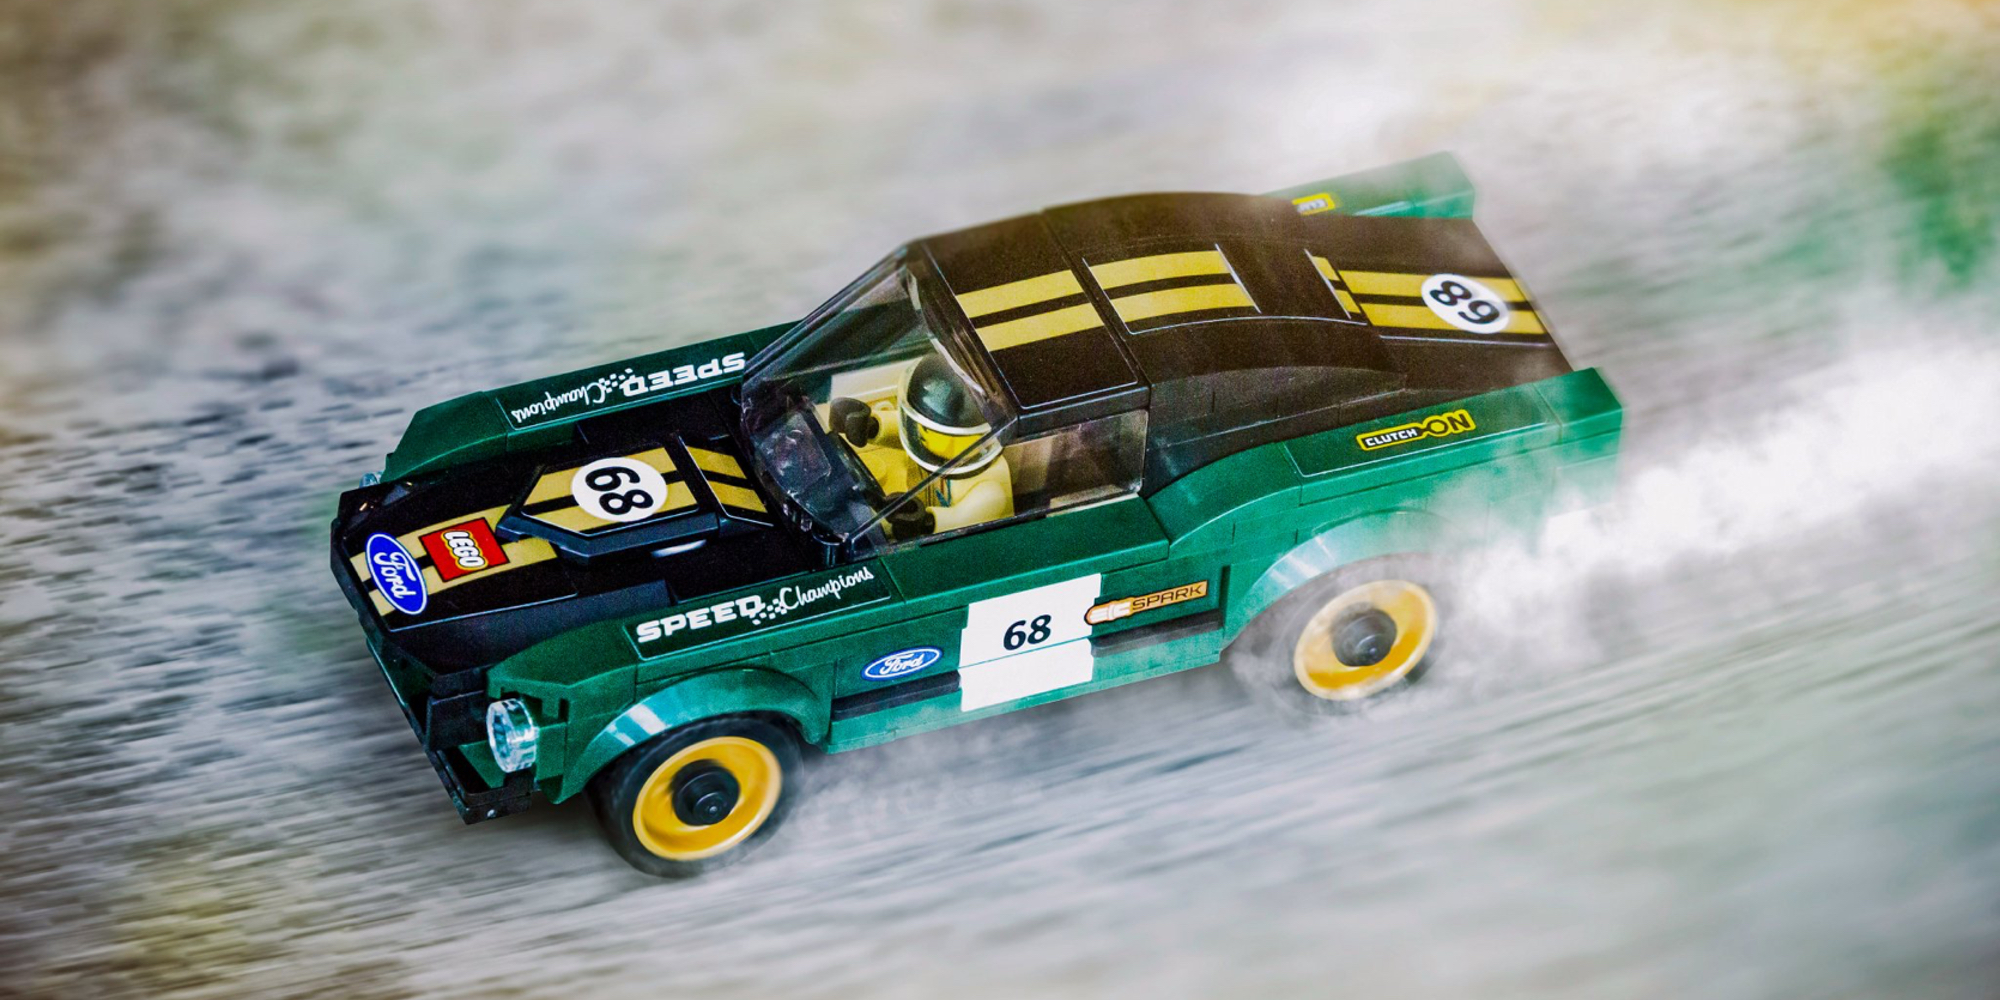 ford mustang fastback 1968 lego